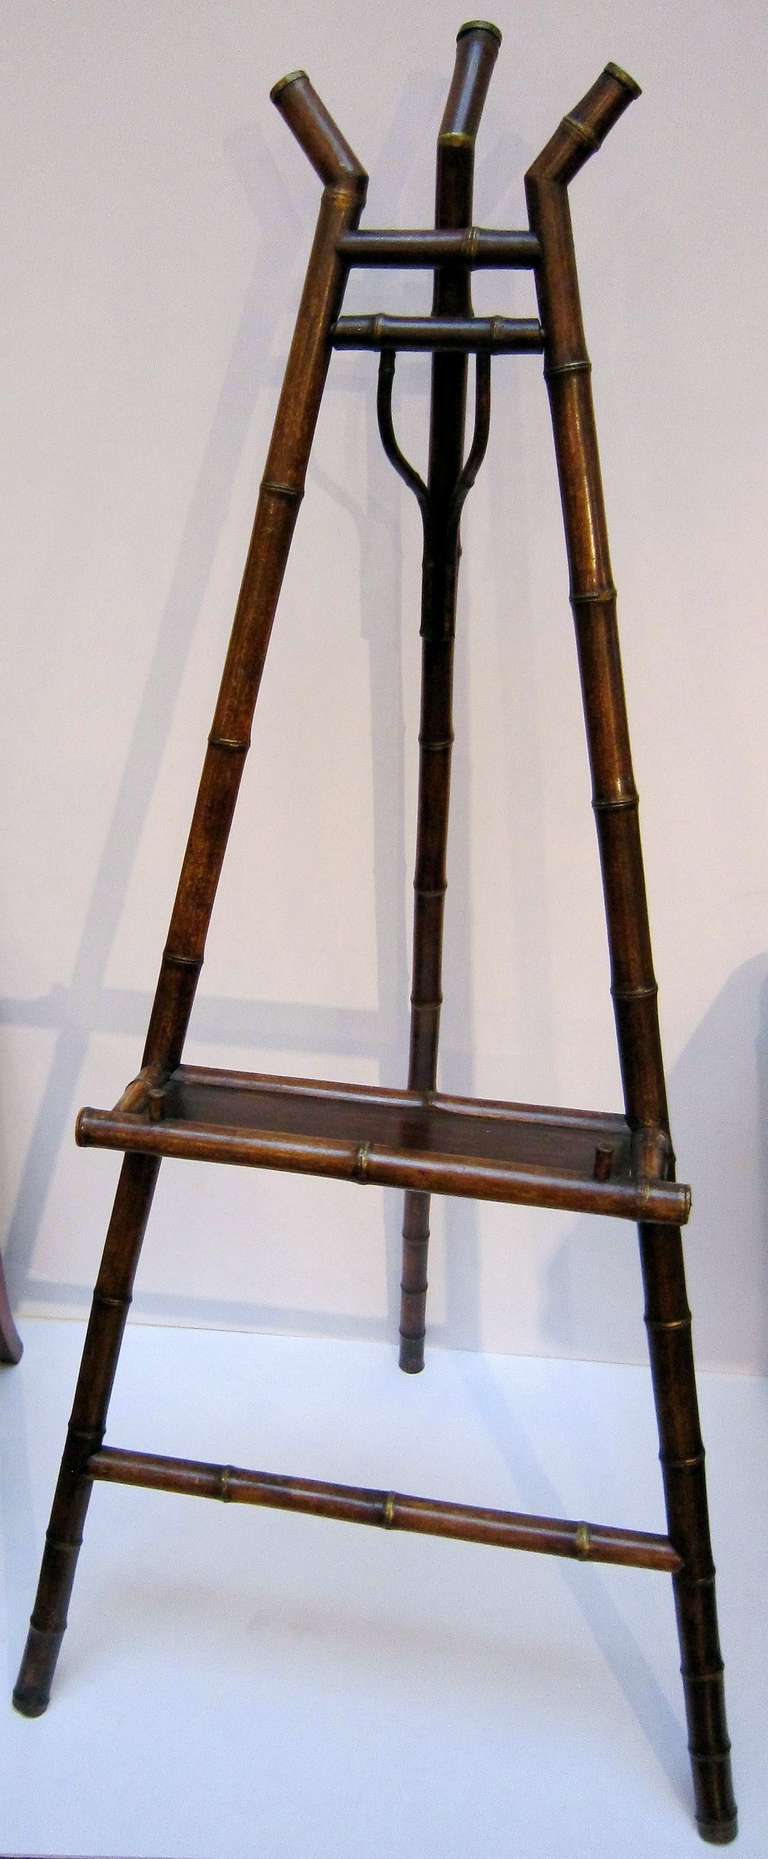 An English bamboo display easel featuring a handsomely patinated frame with fixed lacquer panel support tray.

Dimensions: H 64